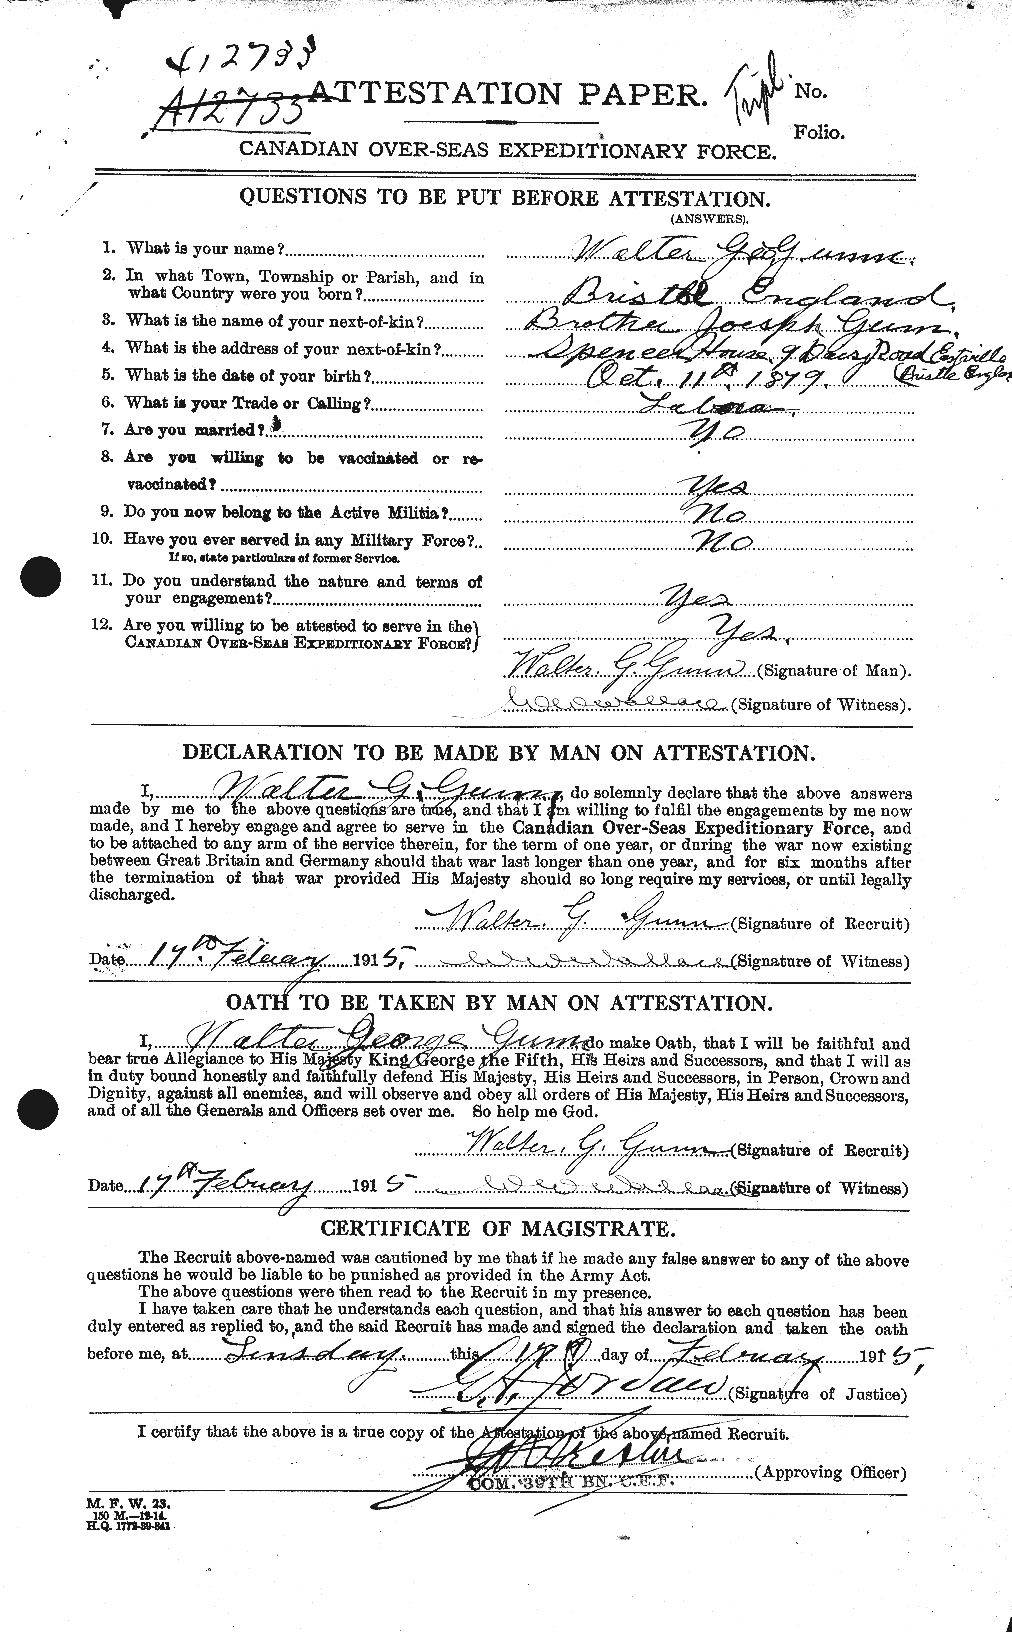 Personnel Records of the First World War - CEF 369345a